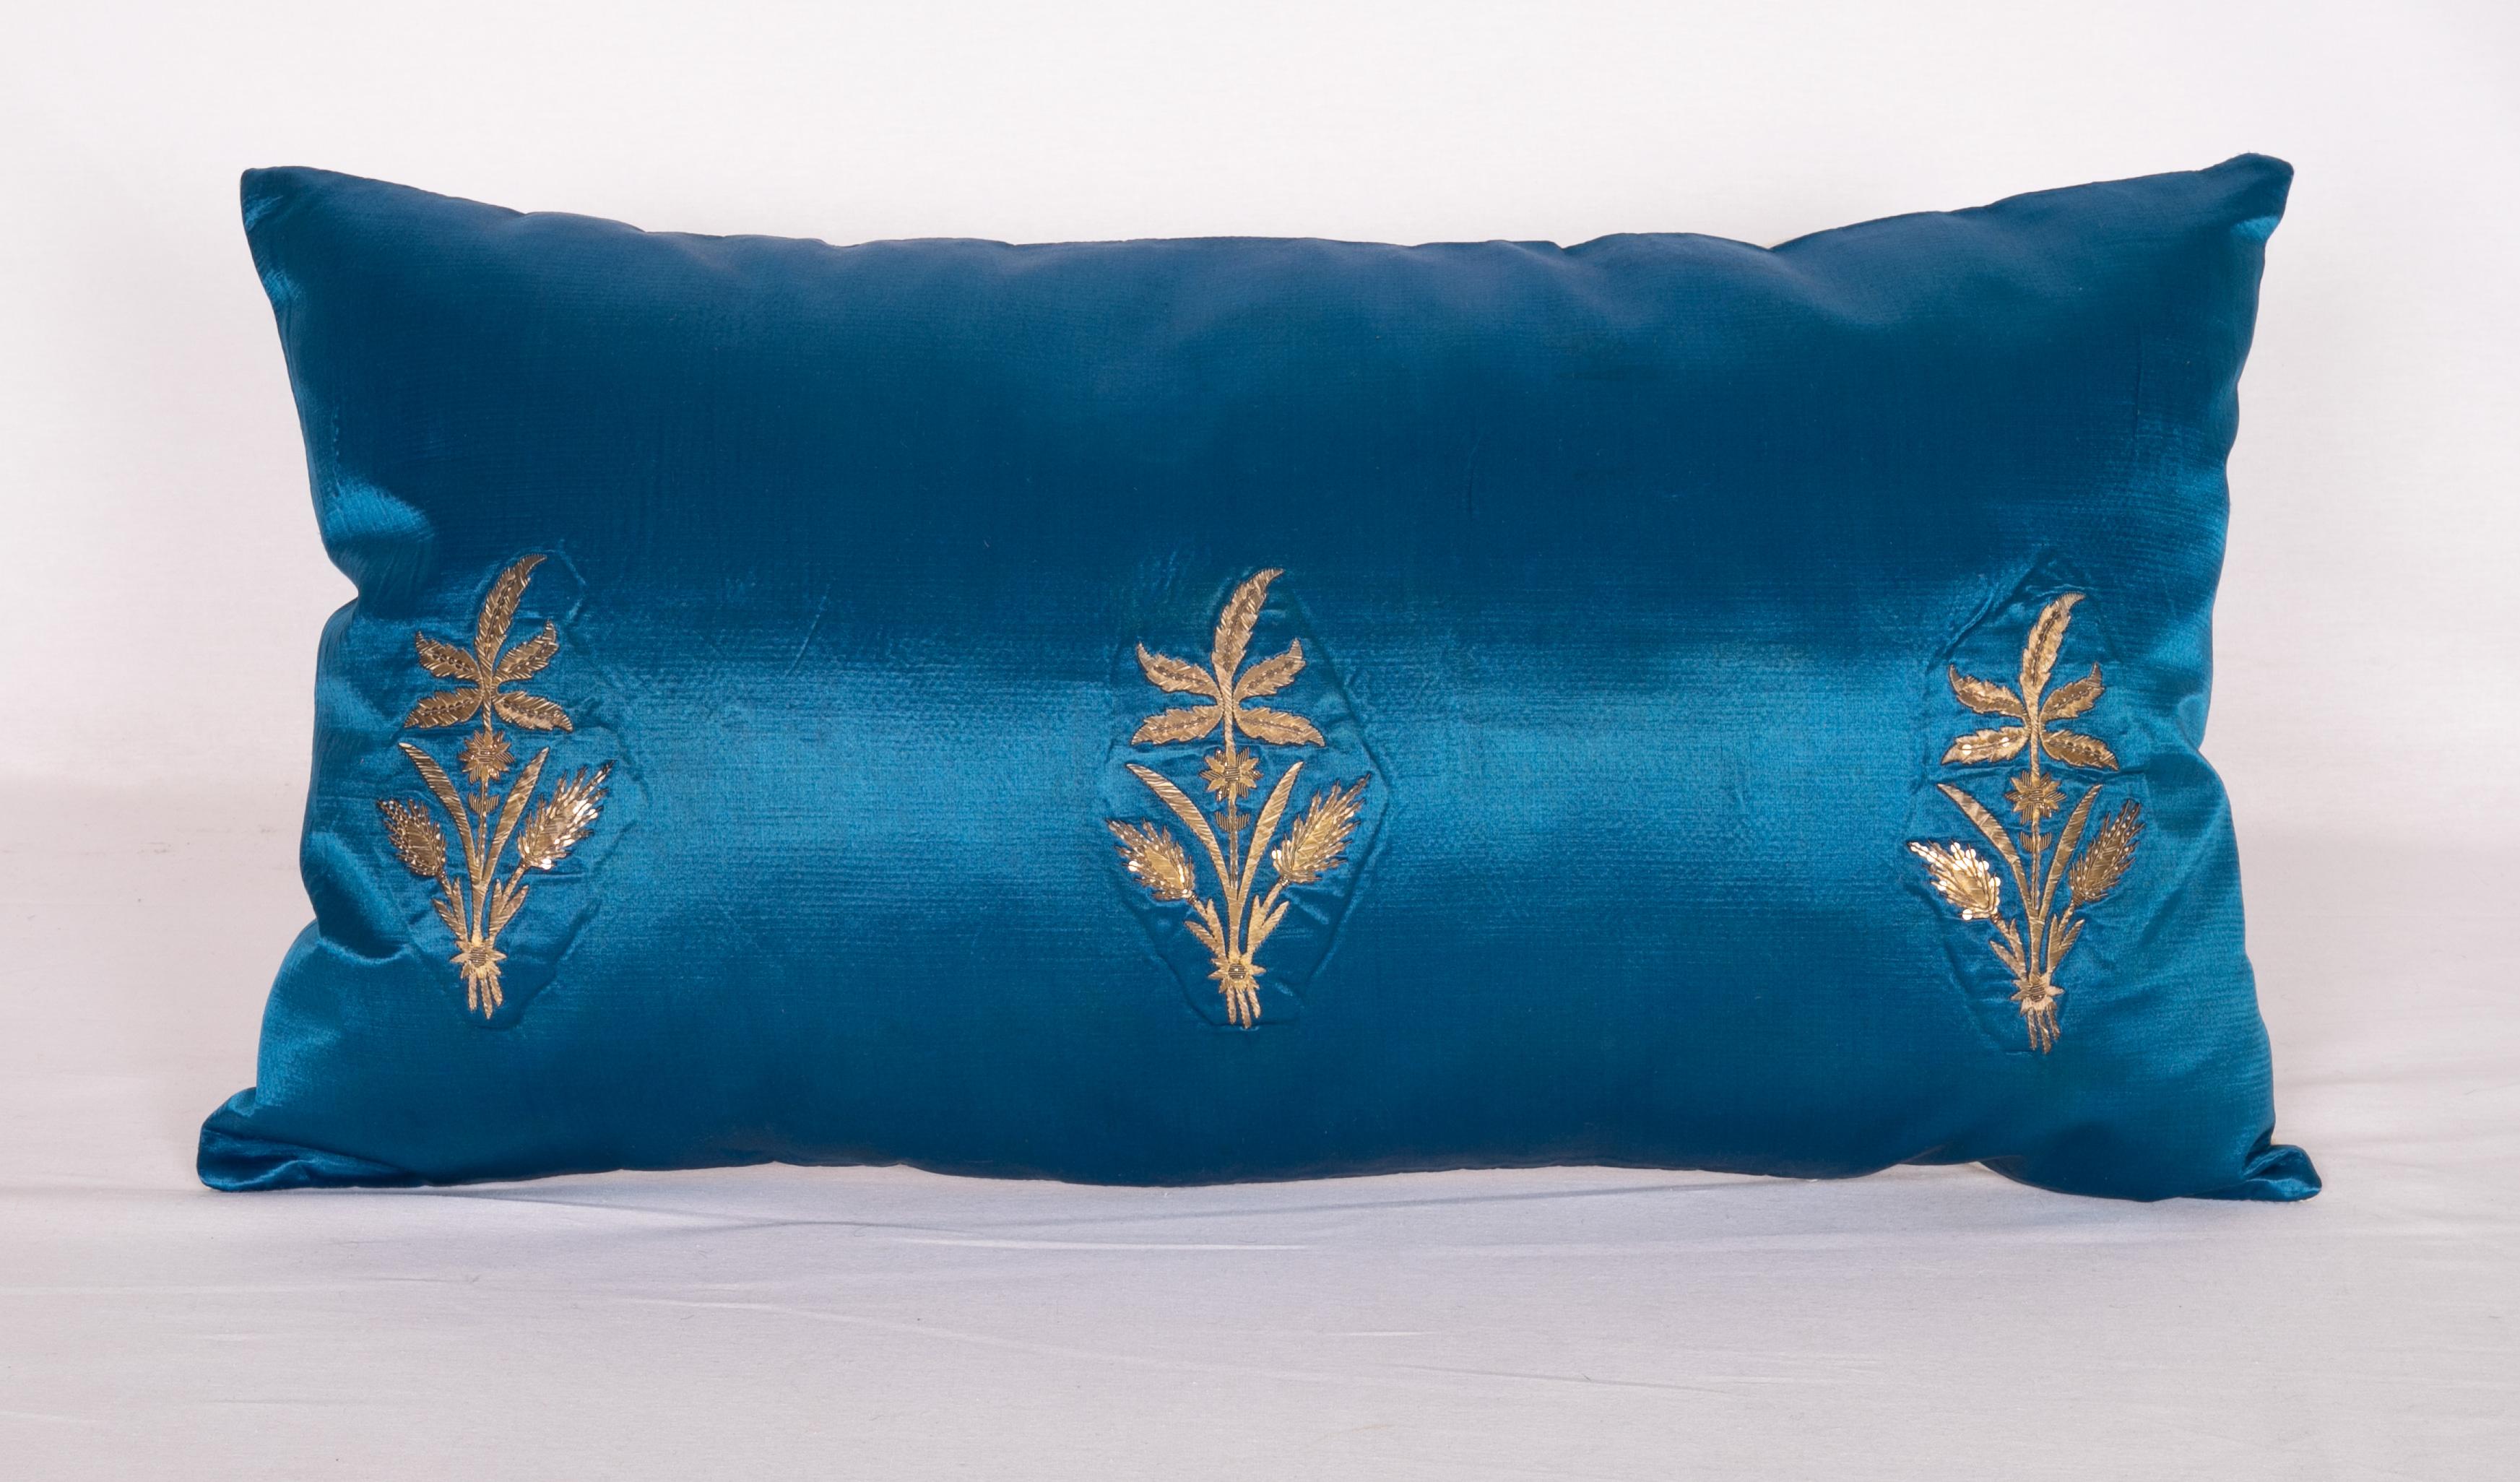 Turkish Antique Ottoman, Gold on Blue Pillow Cases, Late 19th c. For Sale